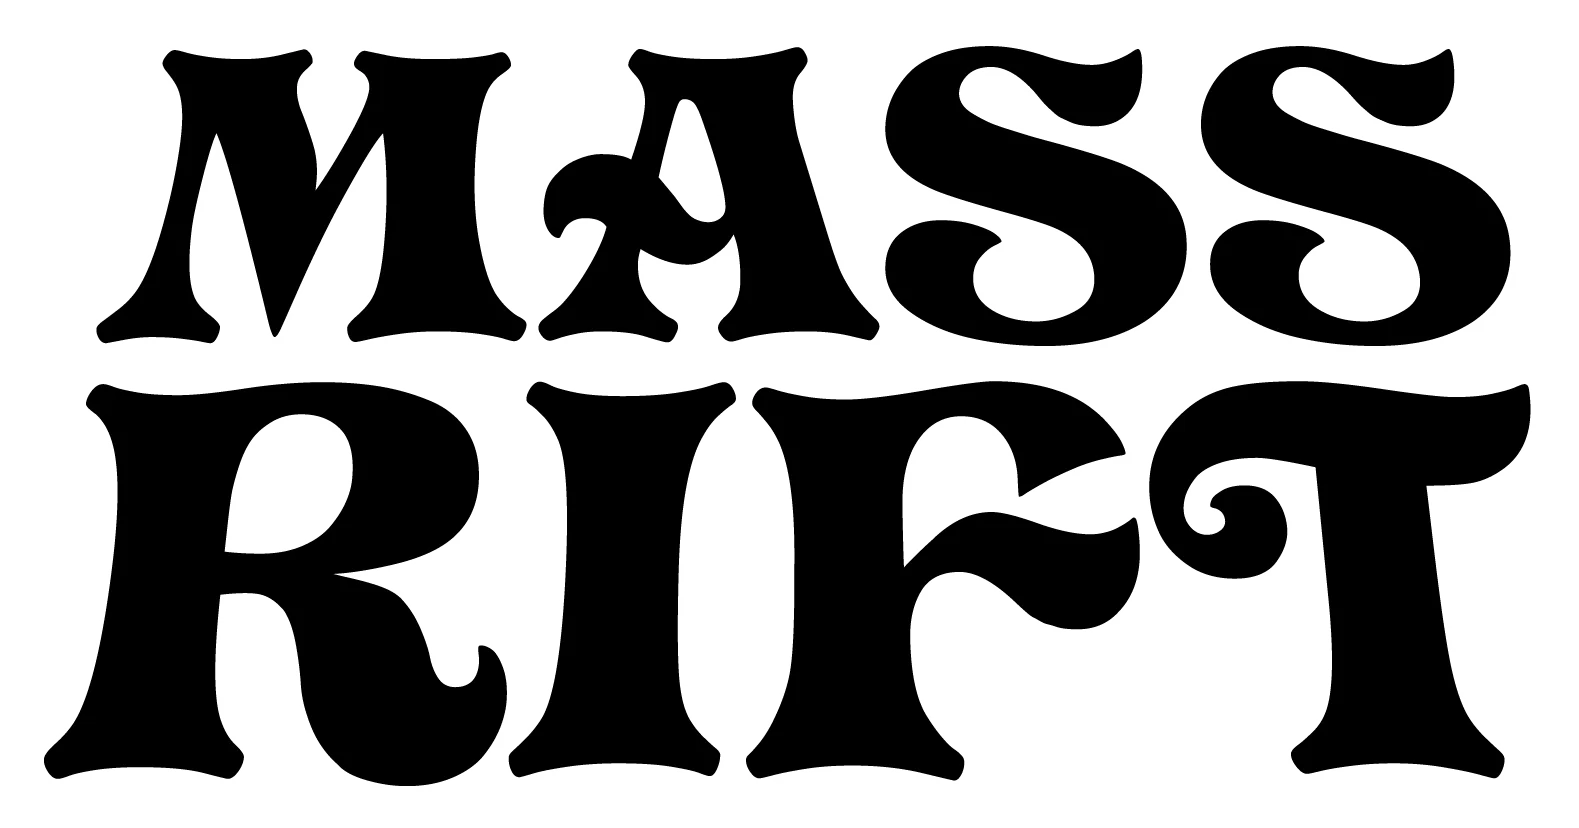 Mass Rift logo.
The band name in black, bold, slightly squiggly letters.